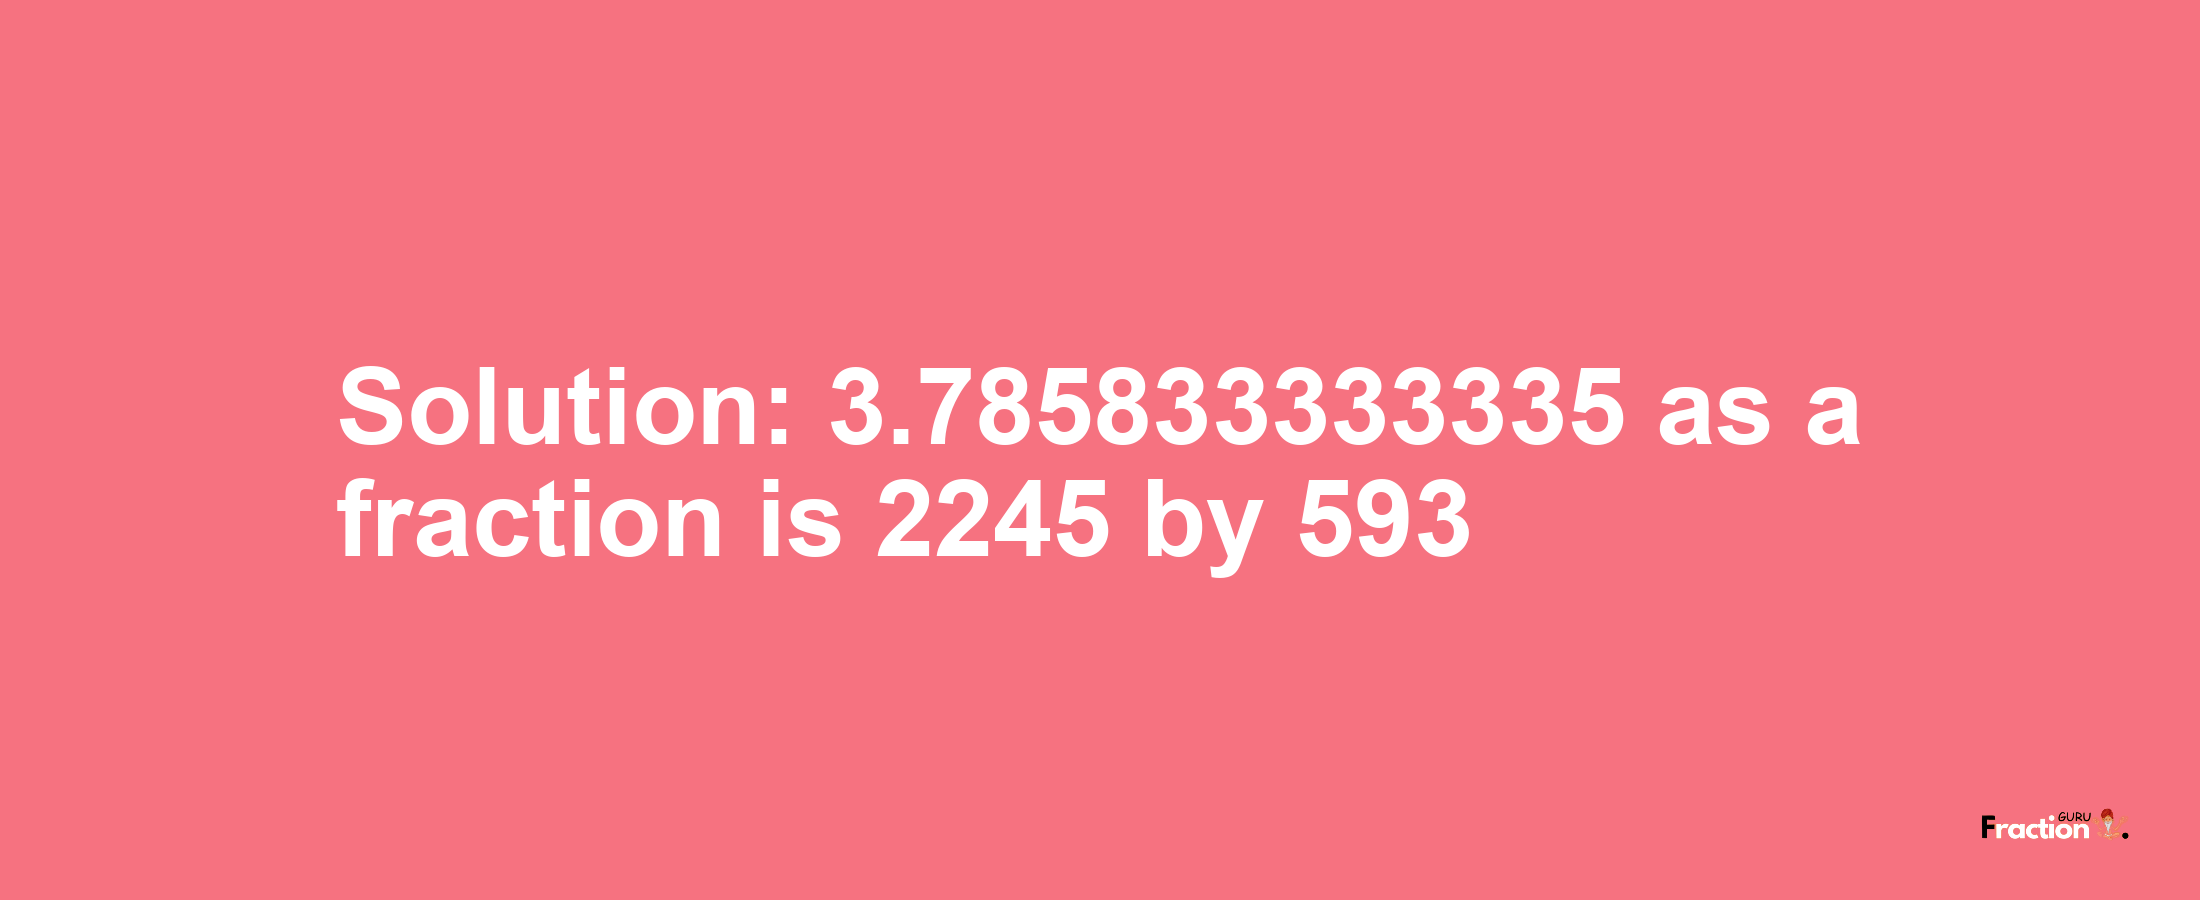 Solution:3.785833333335 as a fraction is 2245/593